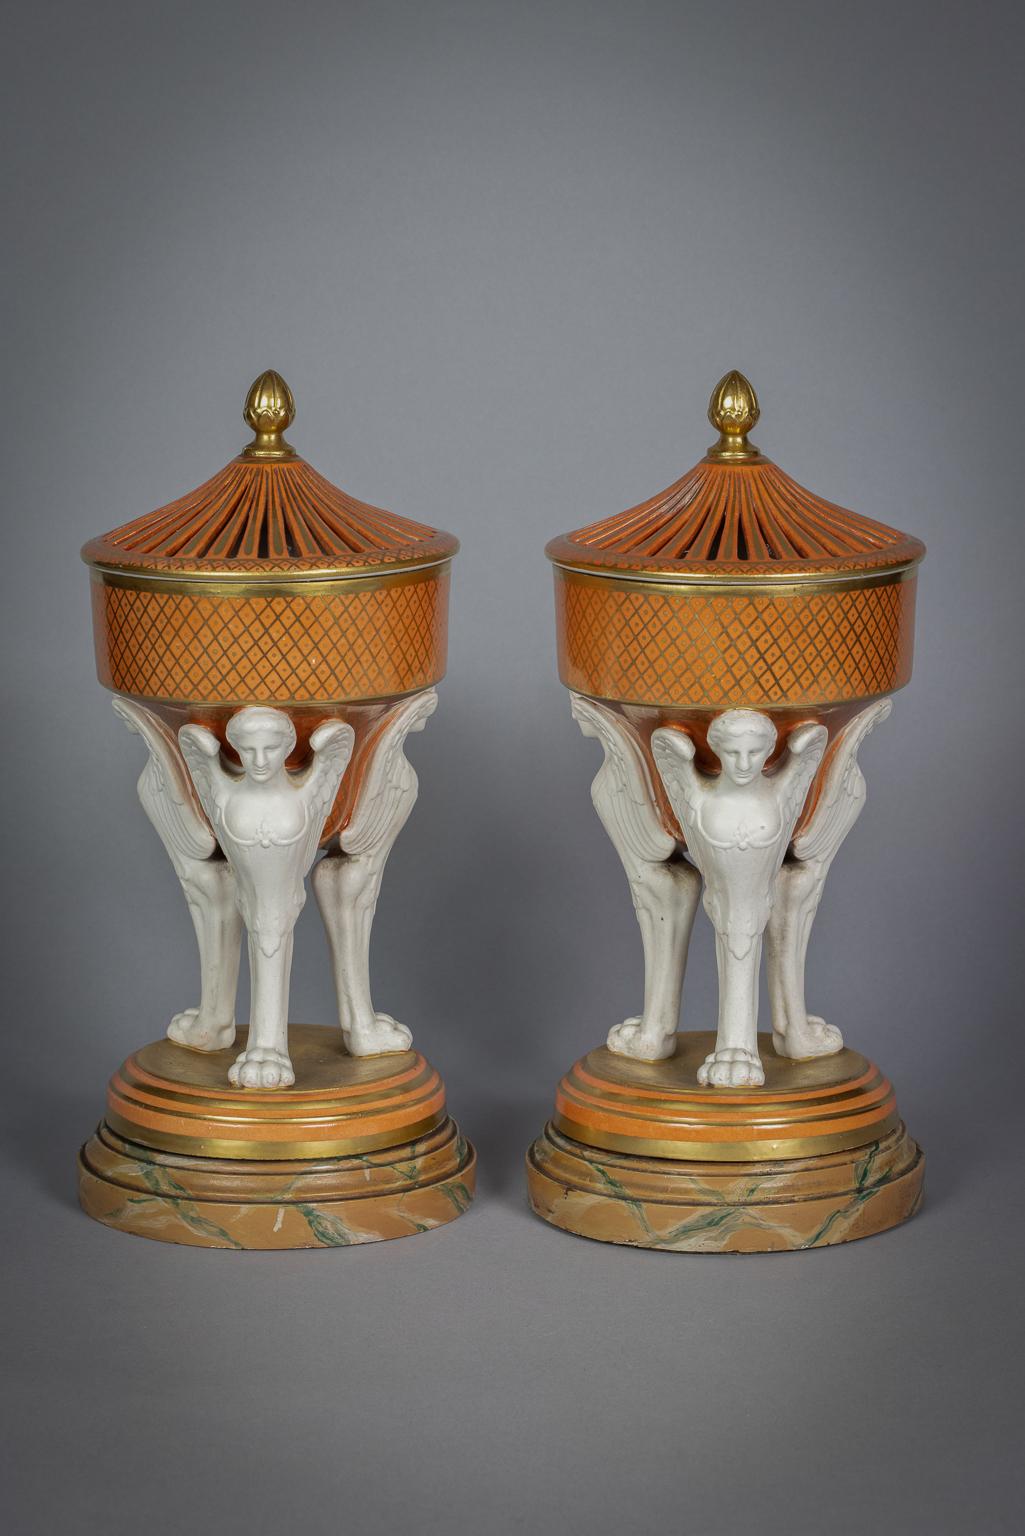 Early 19th Century Pair of Covered Porcelain and Bisquit Figural Potpourri Urns, circa 1820 For Sale